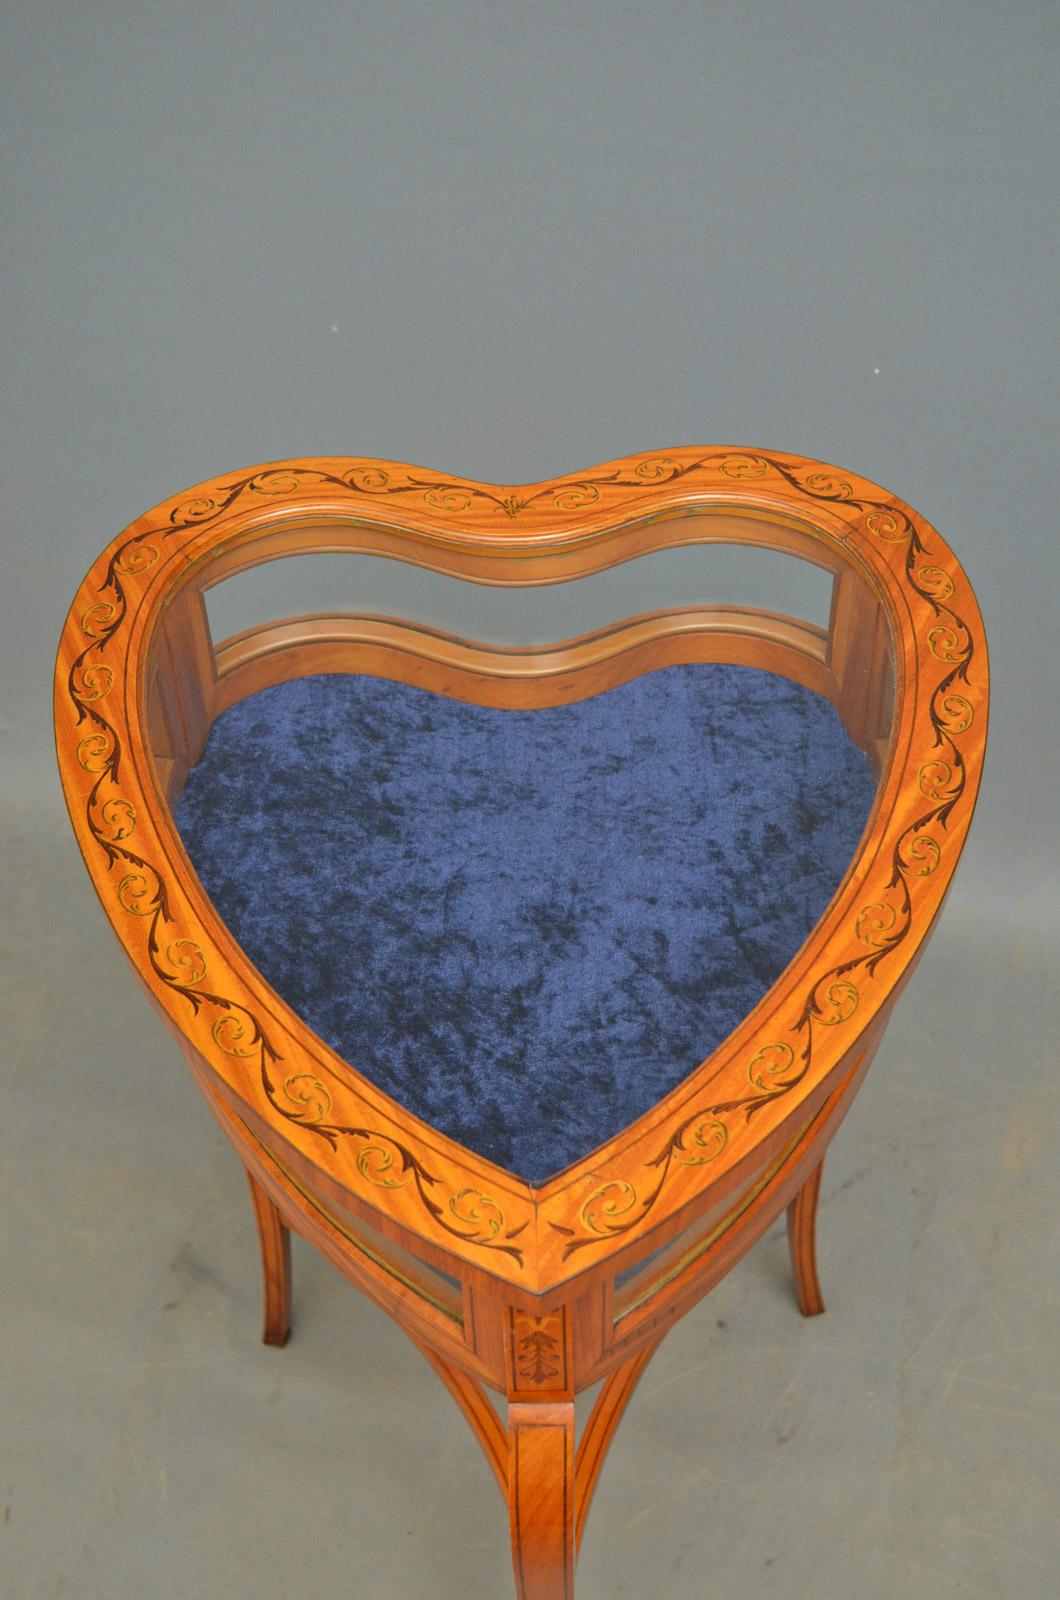 heart shaped display table